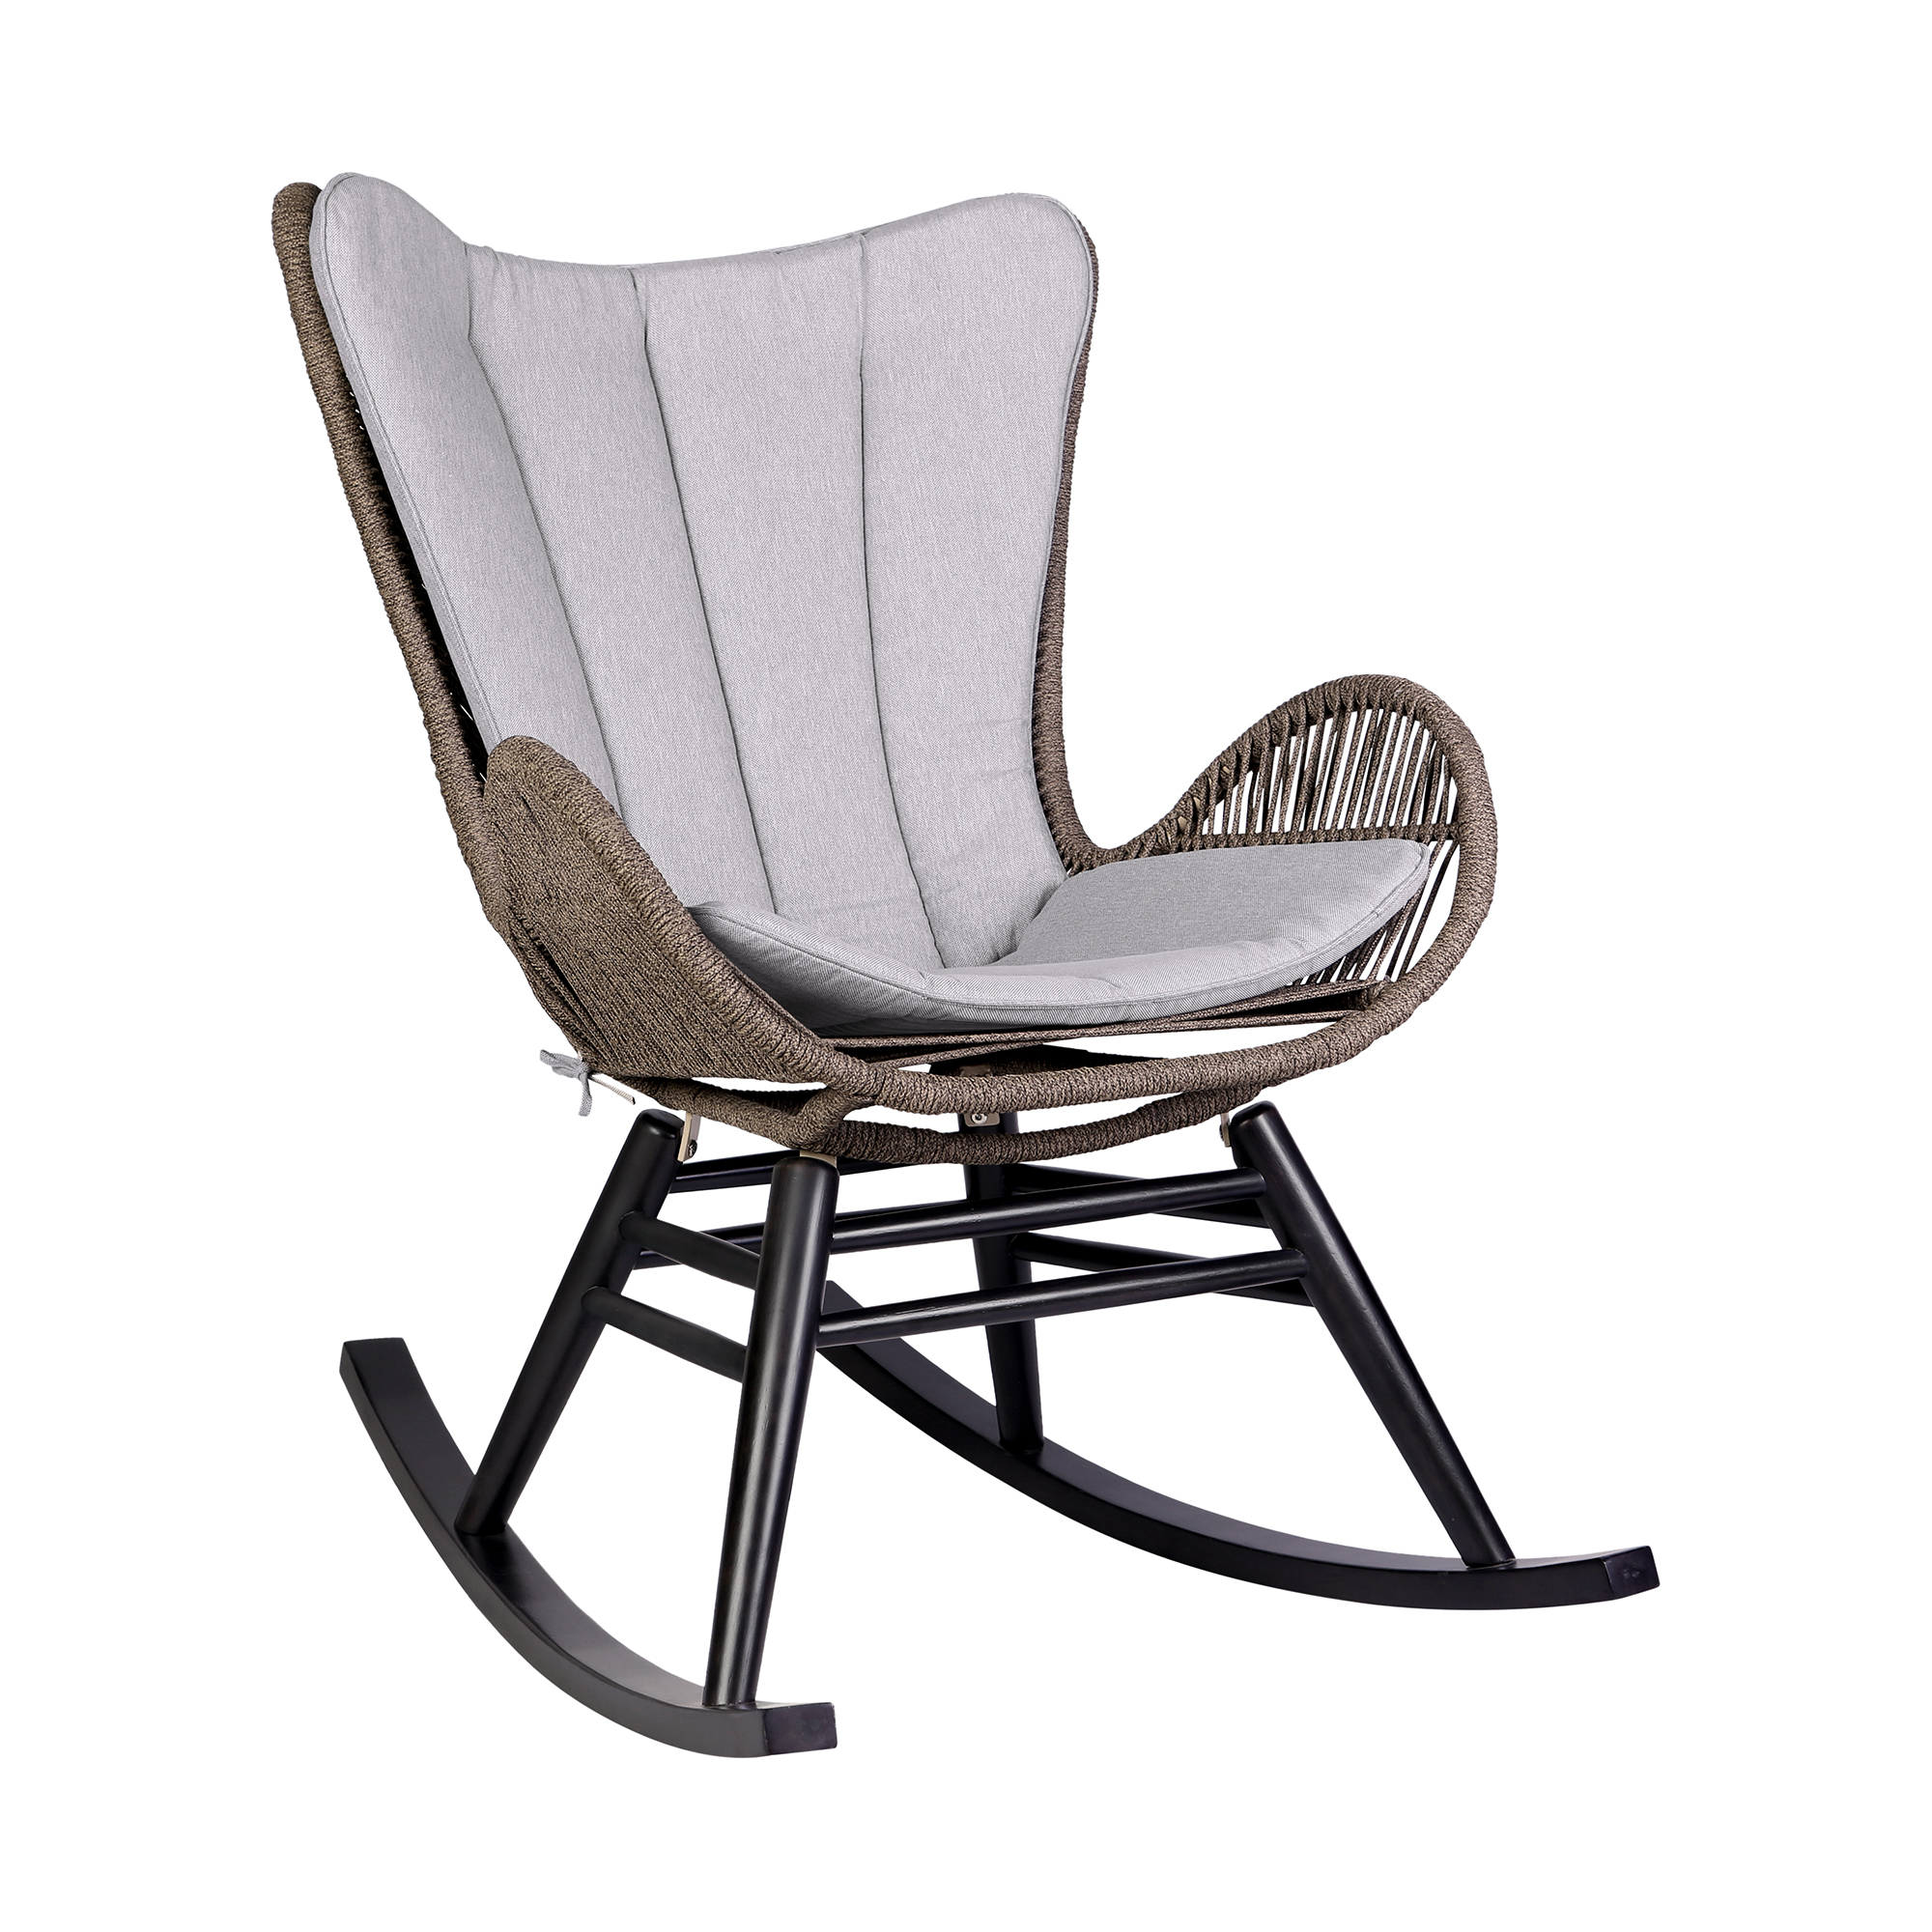 Fanny Outdoor Patio Rocking chair in Dark Eucalyptus Wood and Truffle Rope - image 1 of 12